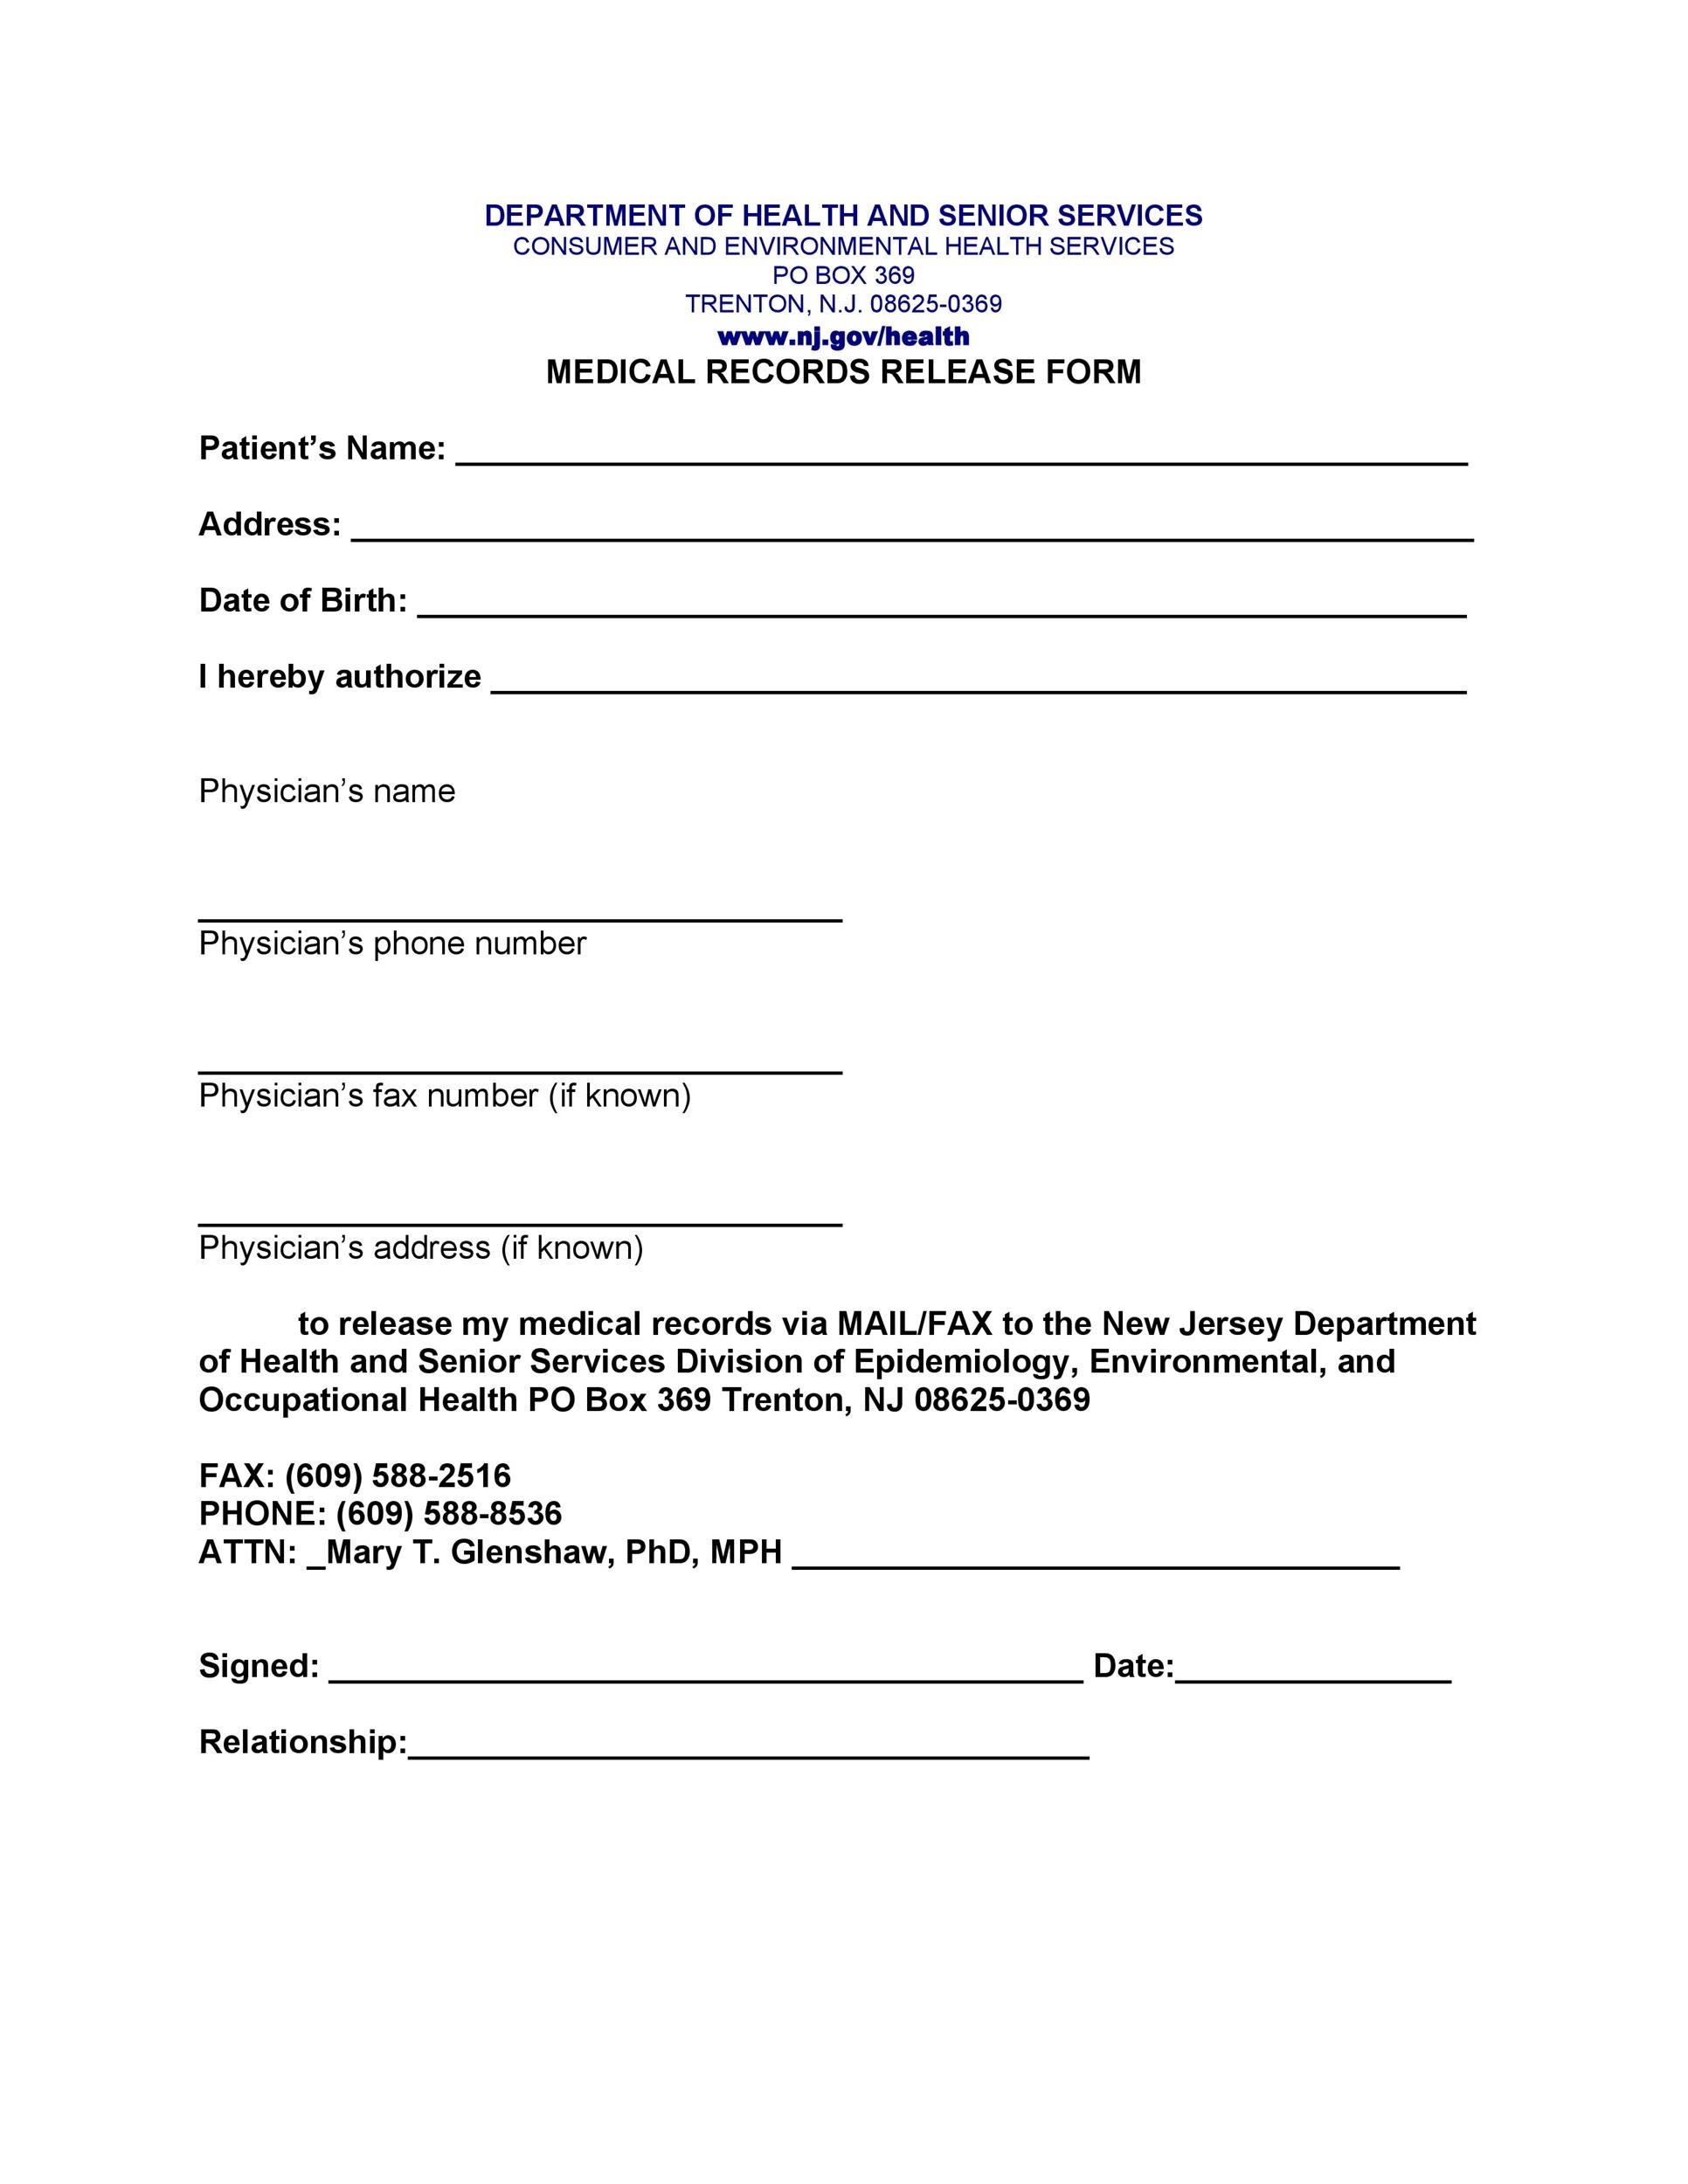 printable-medical-release-form-template-printable-templates